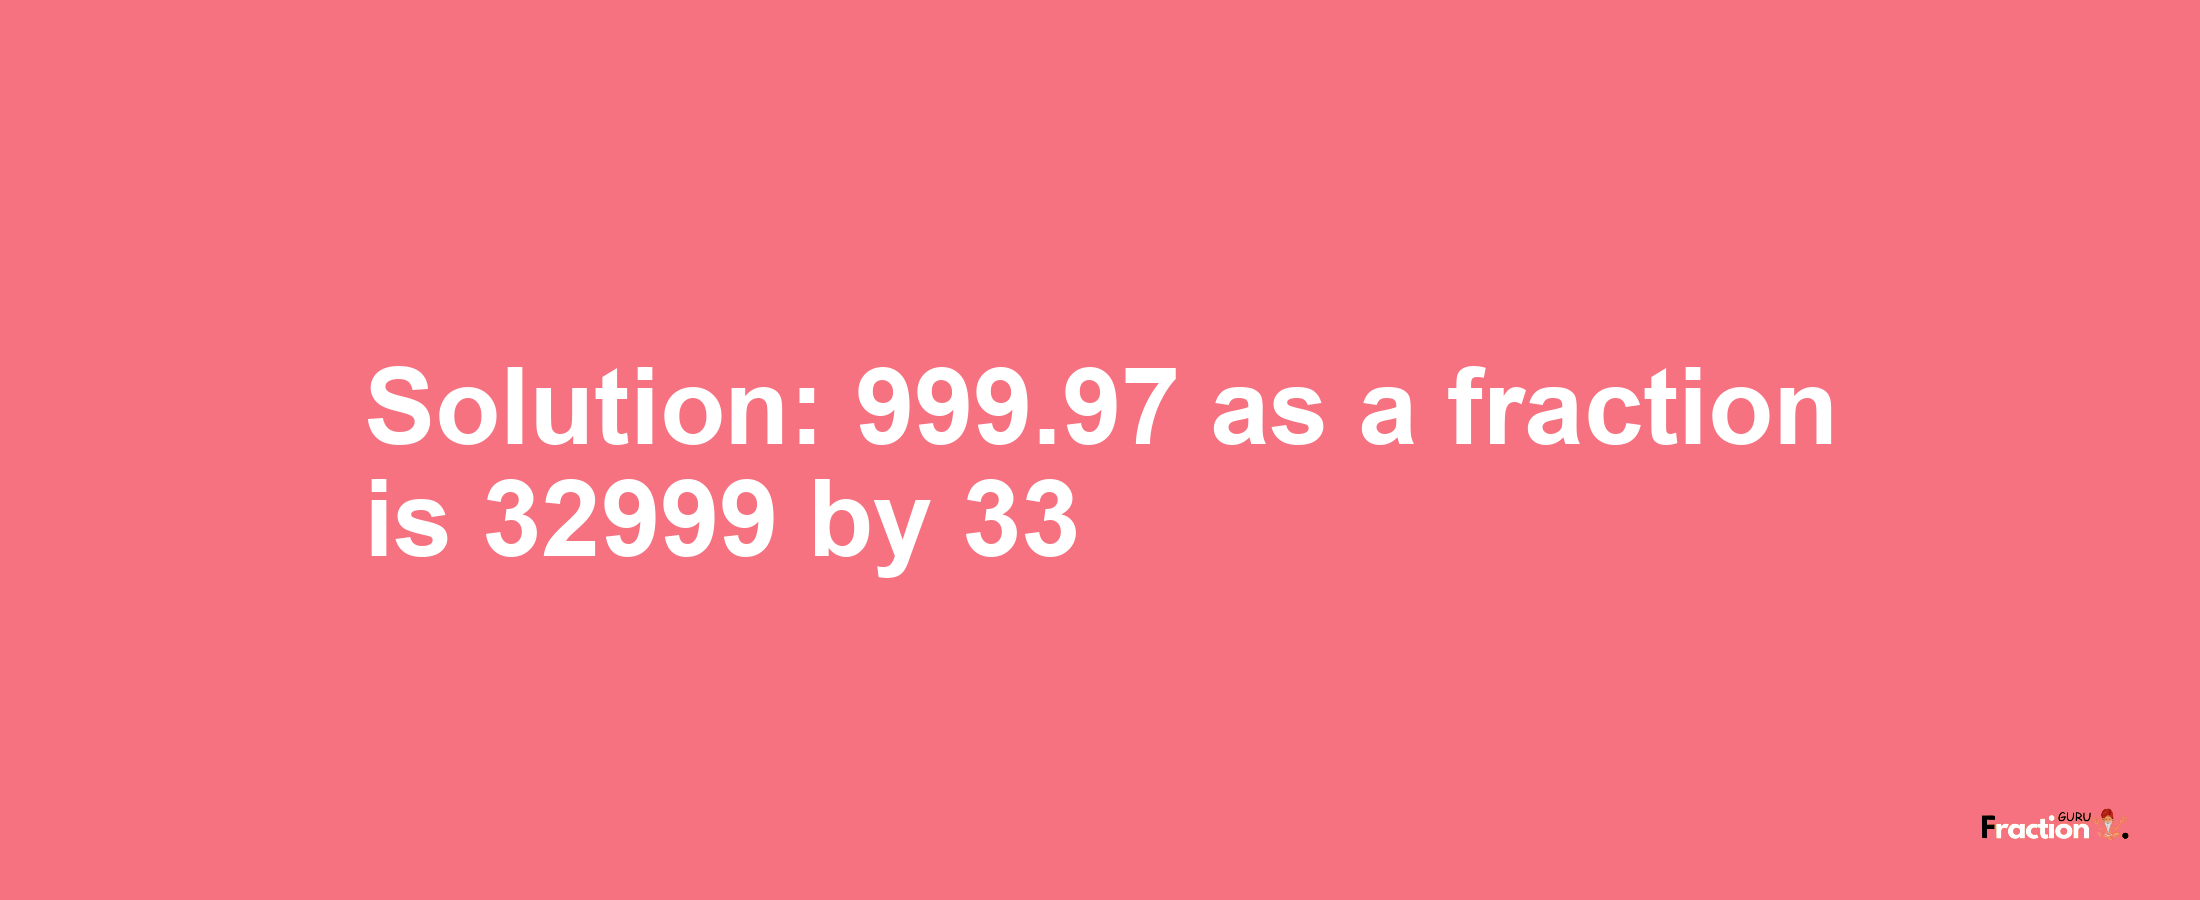 Solution:999.97 as a fraction is 32999/33